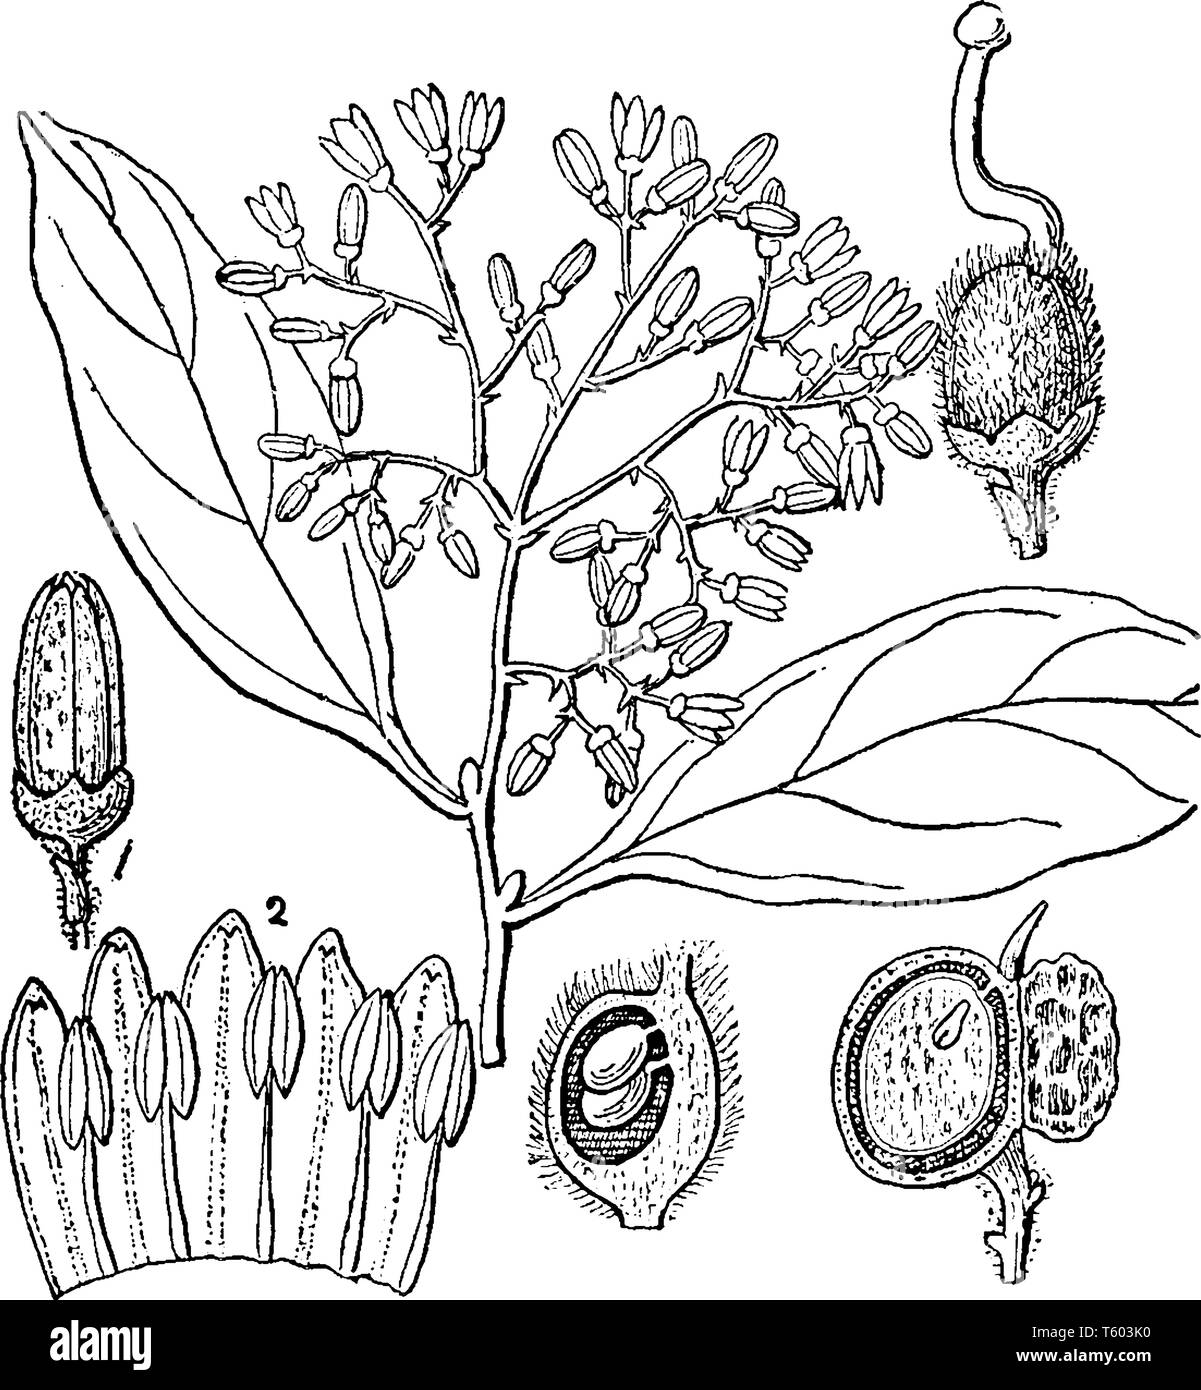 A picture is showing different parts of White-Pear plant also known as Apodytes Dimidiata. The different parts include a flower, corolla, pistil, ovar Stock Vector